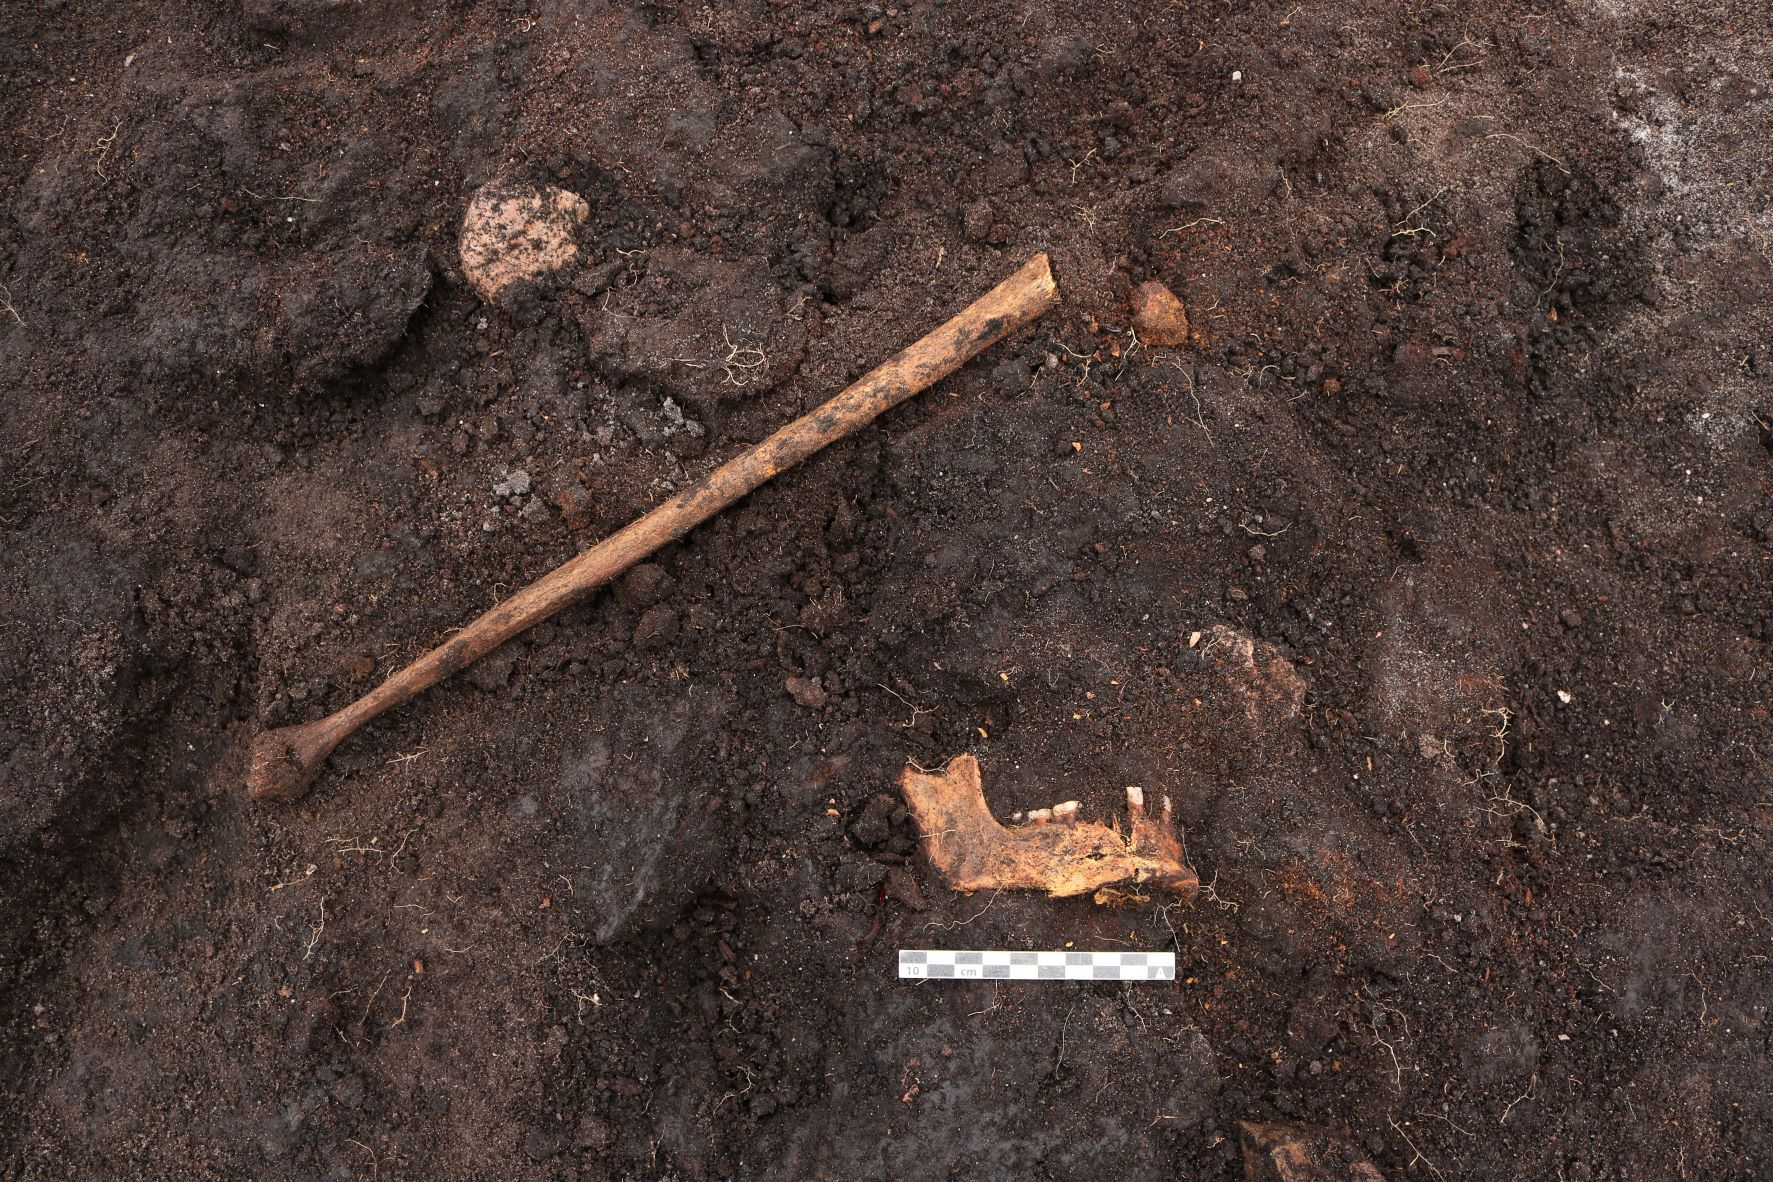 Bones and all: Archeologists find a body from ancient times in a bog just west of Copenhagen